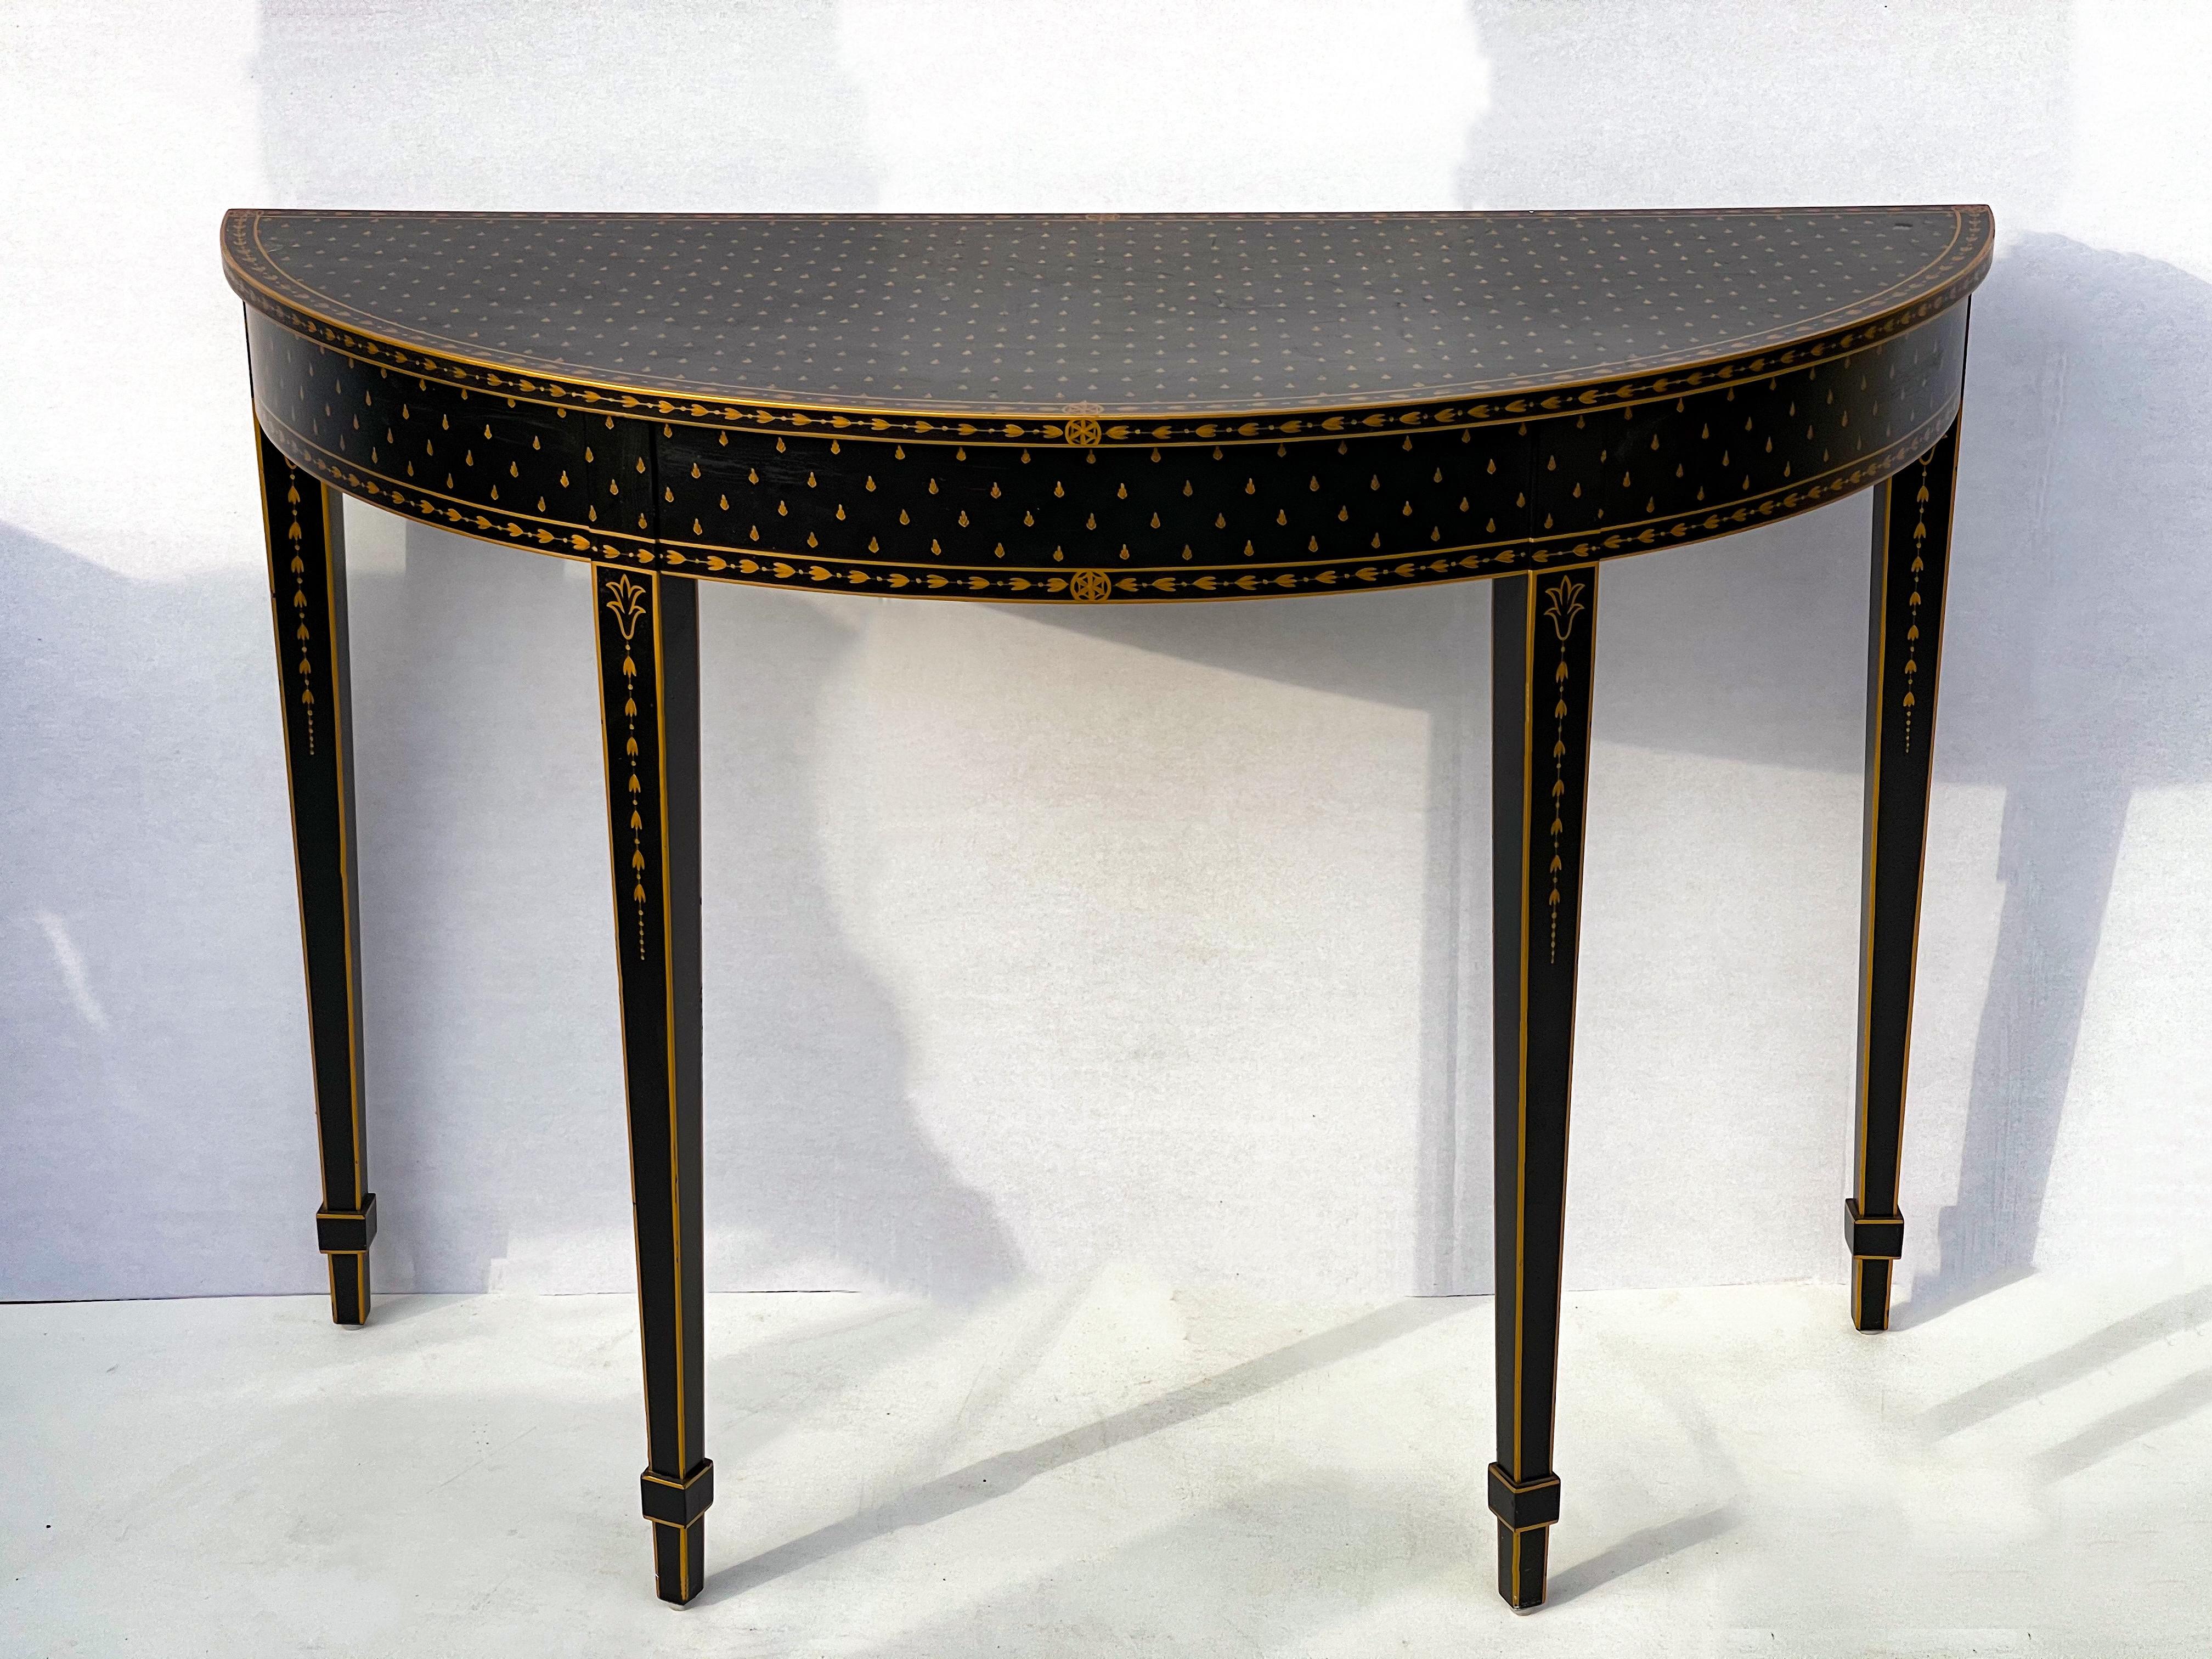 20th Century Regency Style Ebonized and Gilt Painted Console Table by Chelsea House